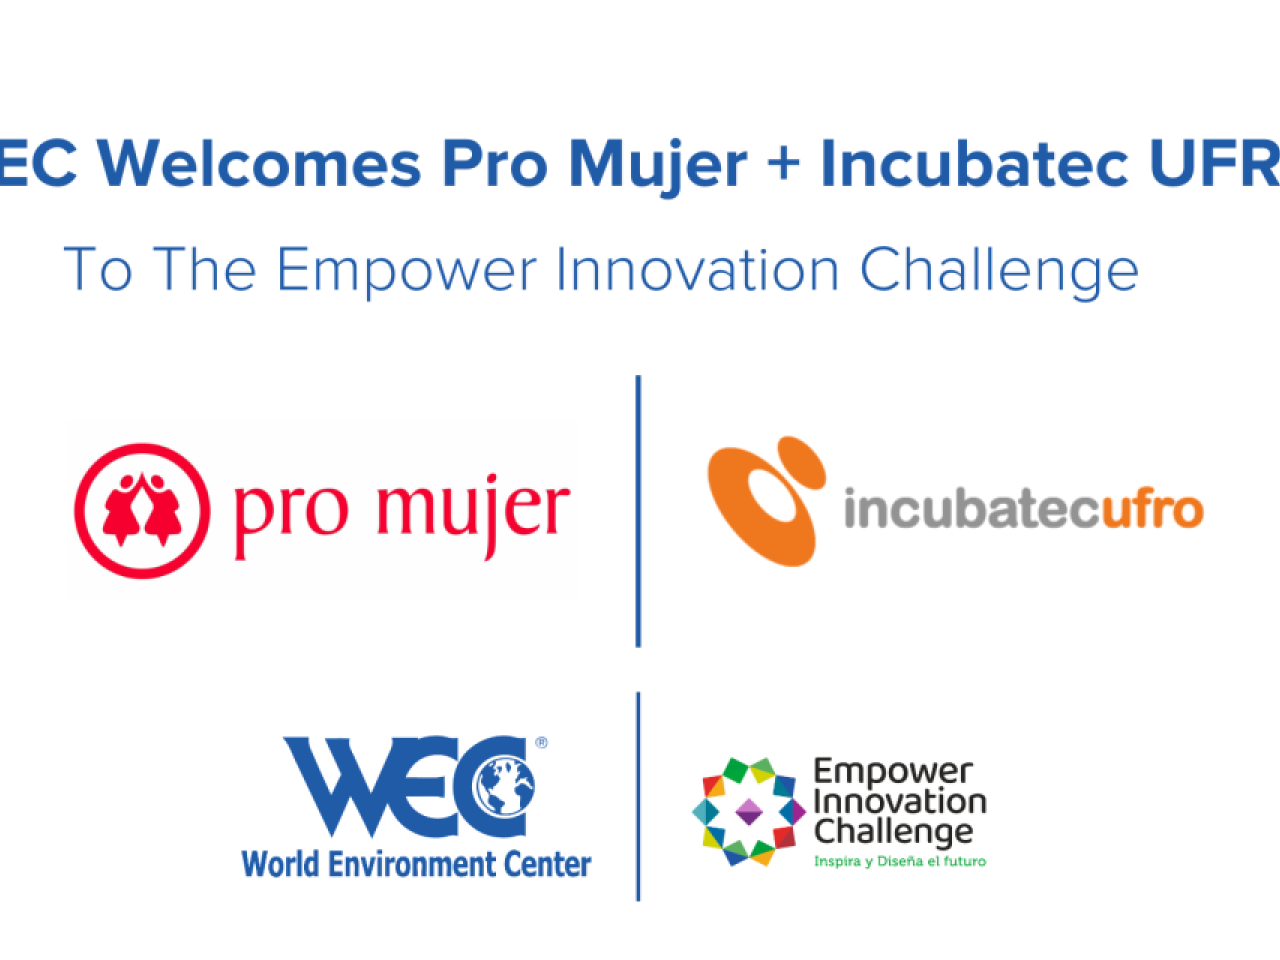 Pro Mujer and Incubatecufro - WEC partnership